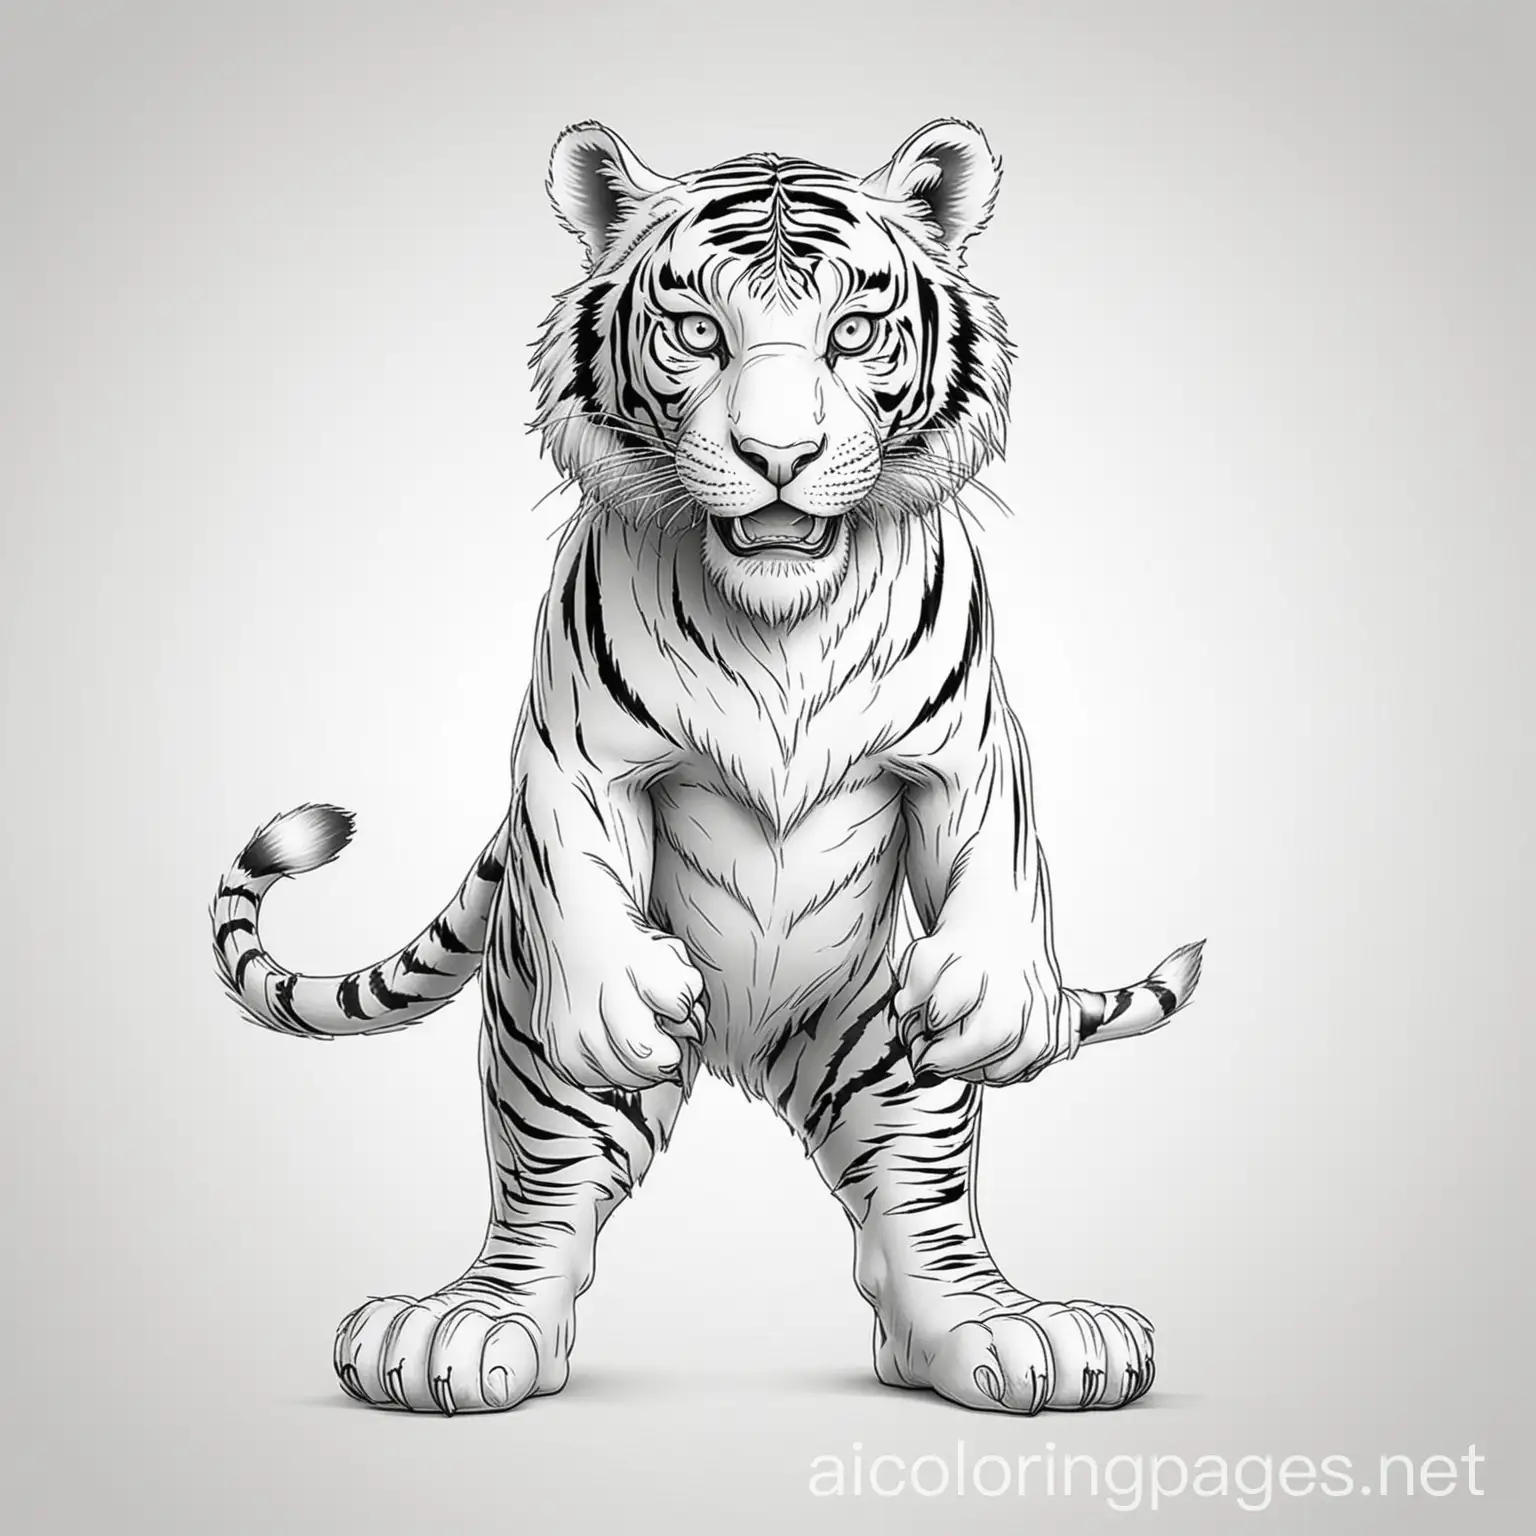 full body of a big big scary tiger who is ready to attack in cartoon style Coloring Page, black and white, line art, white background, Simplicity, Ample White Space. The background of the coloring page is plain white to make it easy for young children to color within the lines. The outlines of all the subjects are easy to distinguish, making it simple for kids to color without too much difficulty, Coloring Page, black and white, line art, white background, Simplicity, Ample White Space. The background of the coloring page is plain white to make it easy for young children to color within the lines. The outlines of all the subjects are easy to distinguish, making it simple for kids to color without too much difficulty